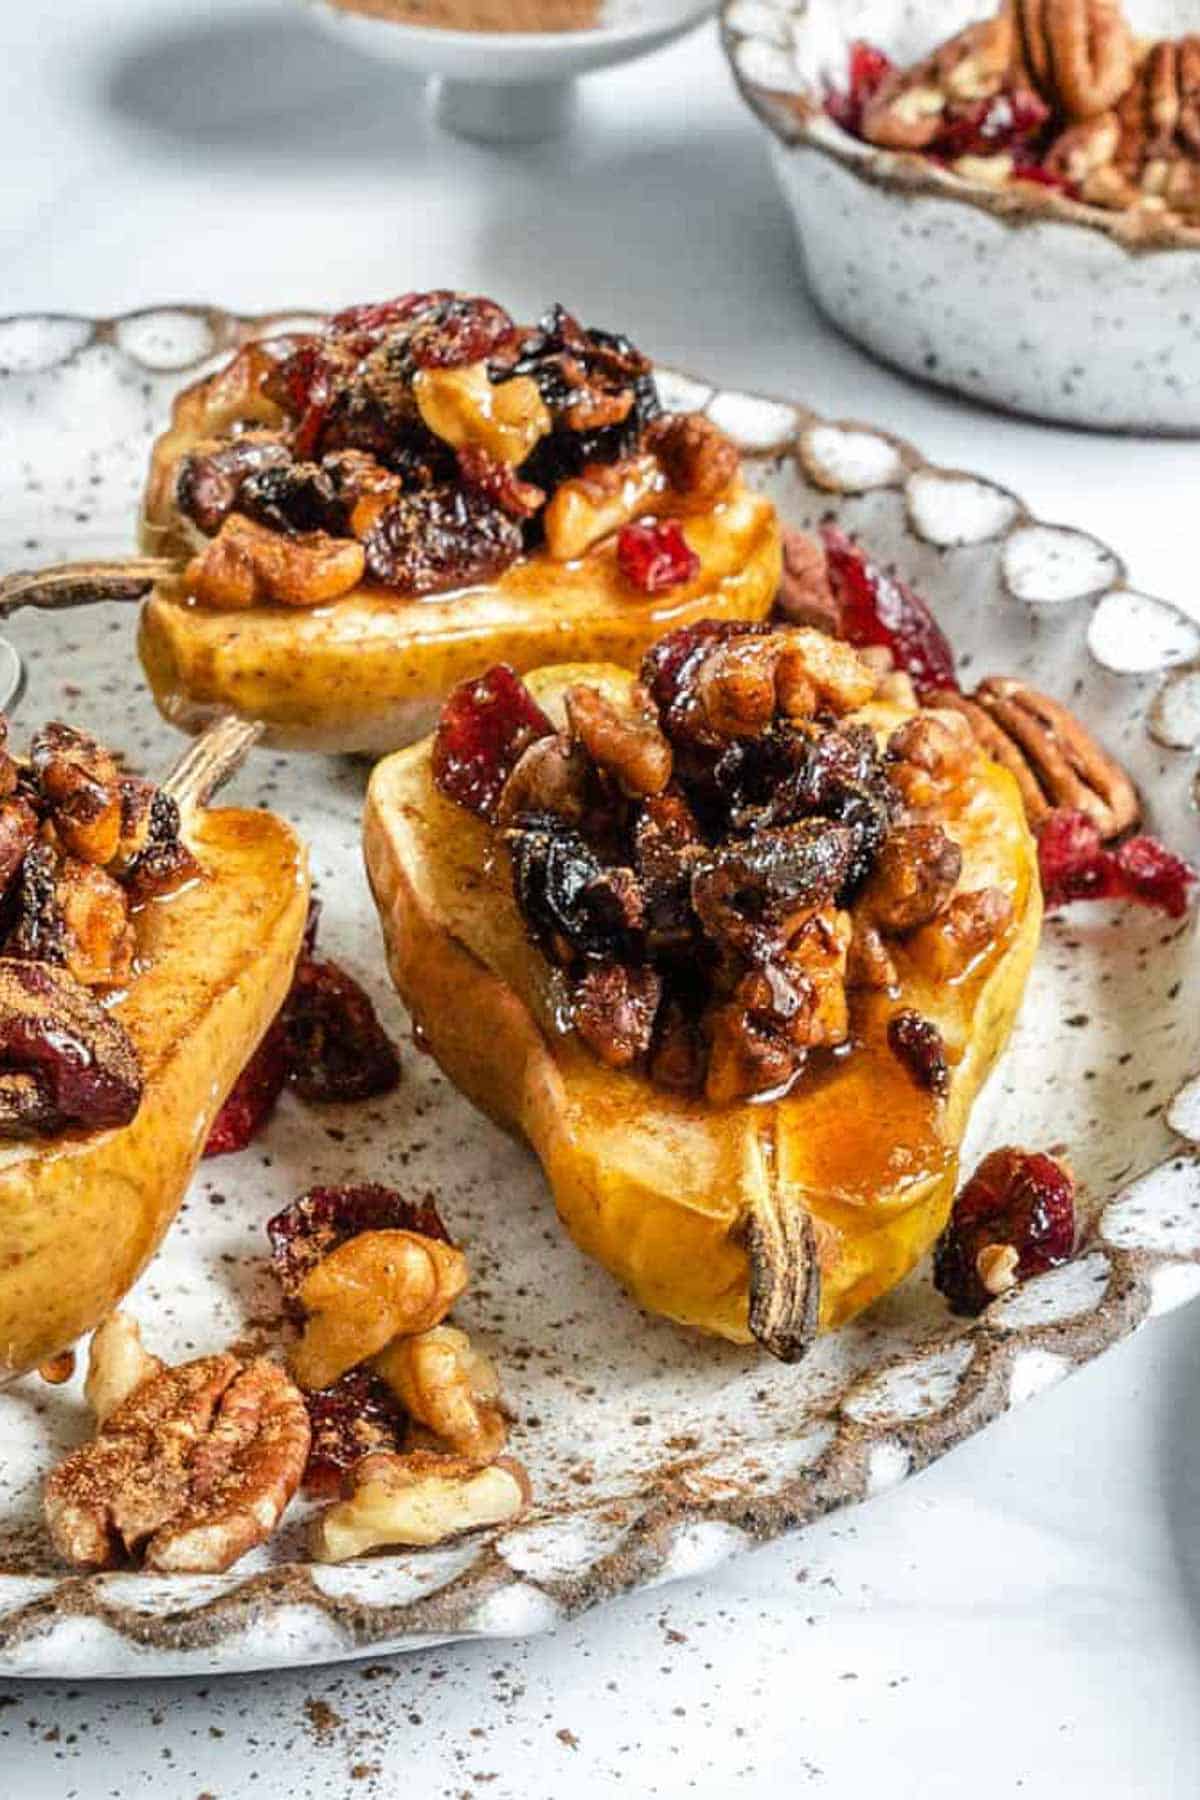 White textured plate with baked pears topped with dried fruit and nuts